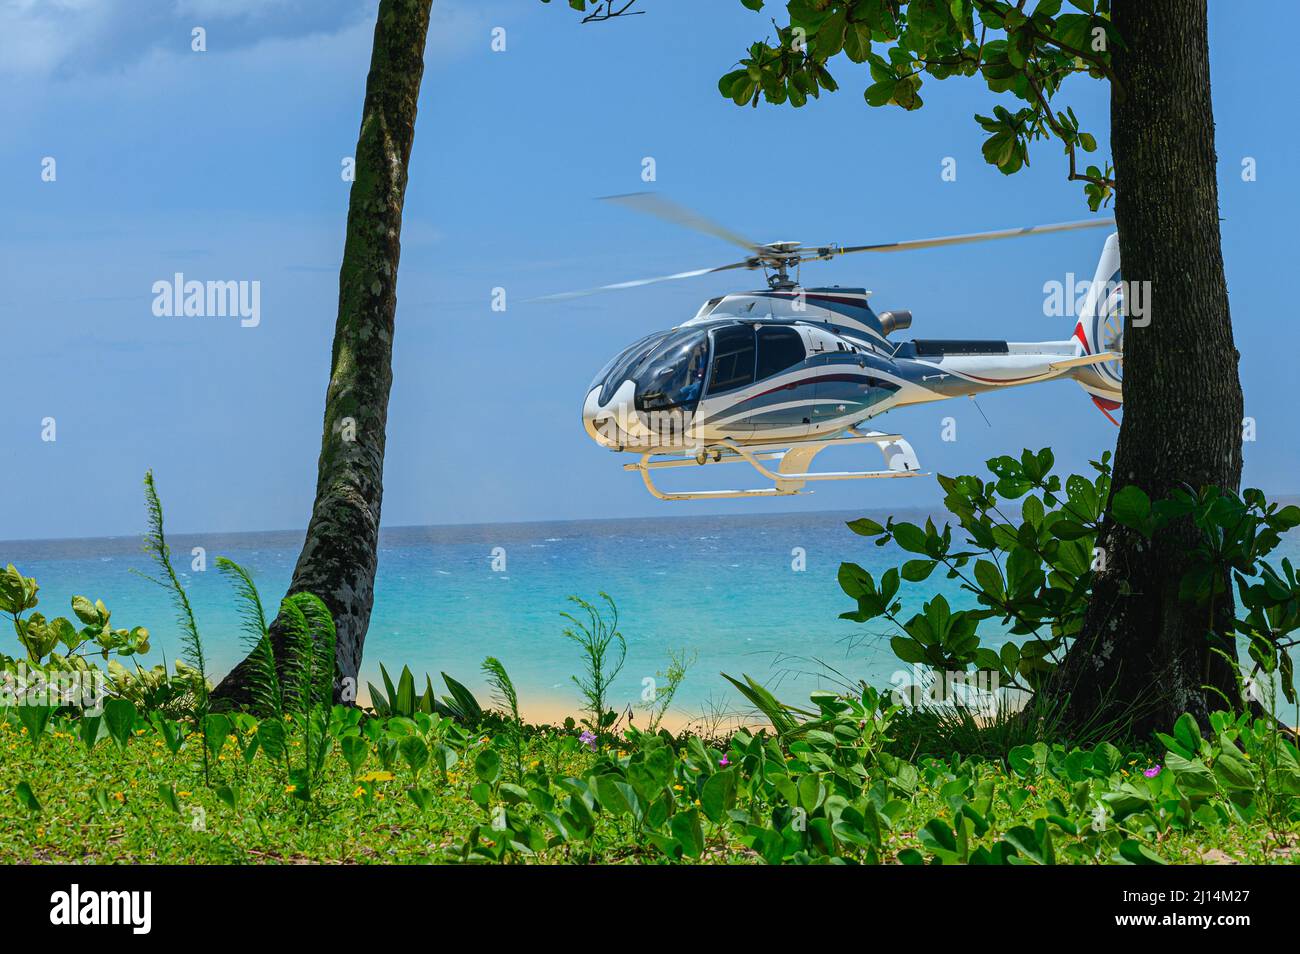 The photo shows a helicopter that brought tourists to the beach to relax. A business aviation helicopter was trying to land directly on the sand. It c Stock Photo